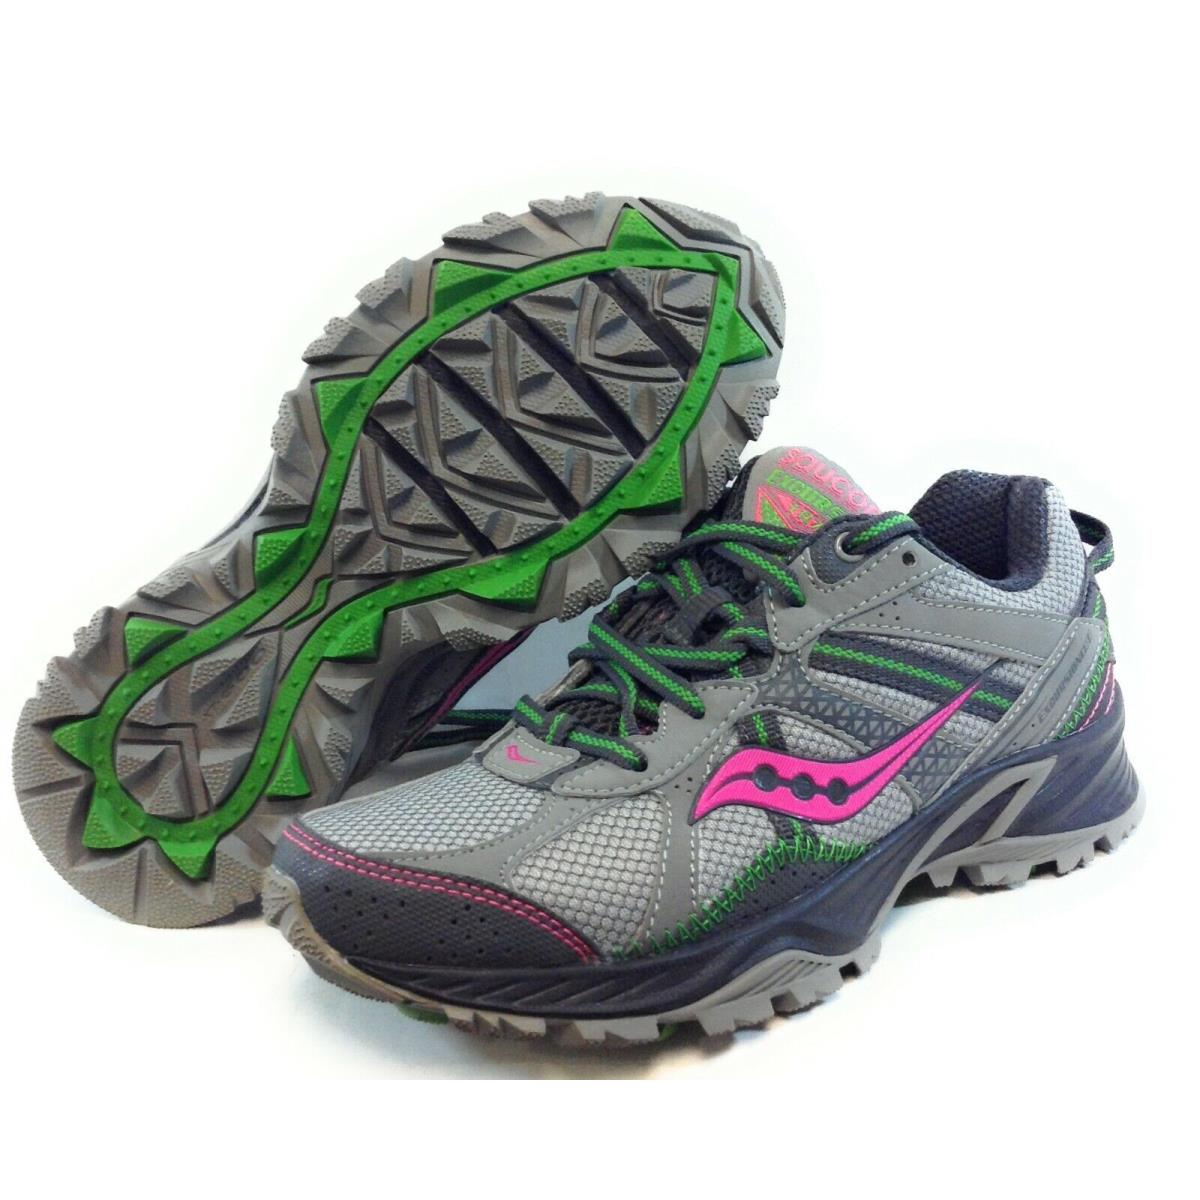 Womens Saucony Grid Excursion TR 7 15170-13 Grey Pink Green Sneakers Shoes